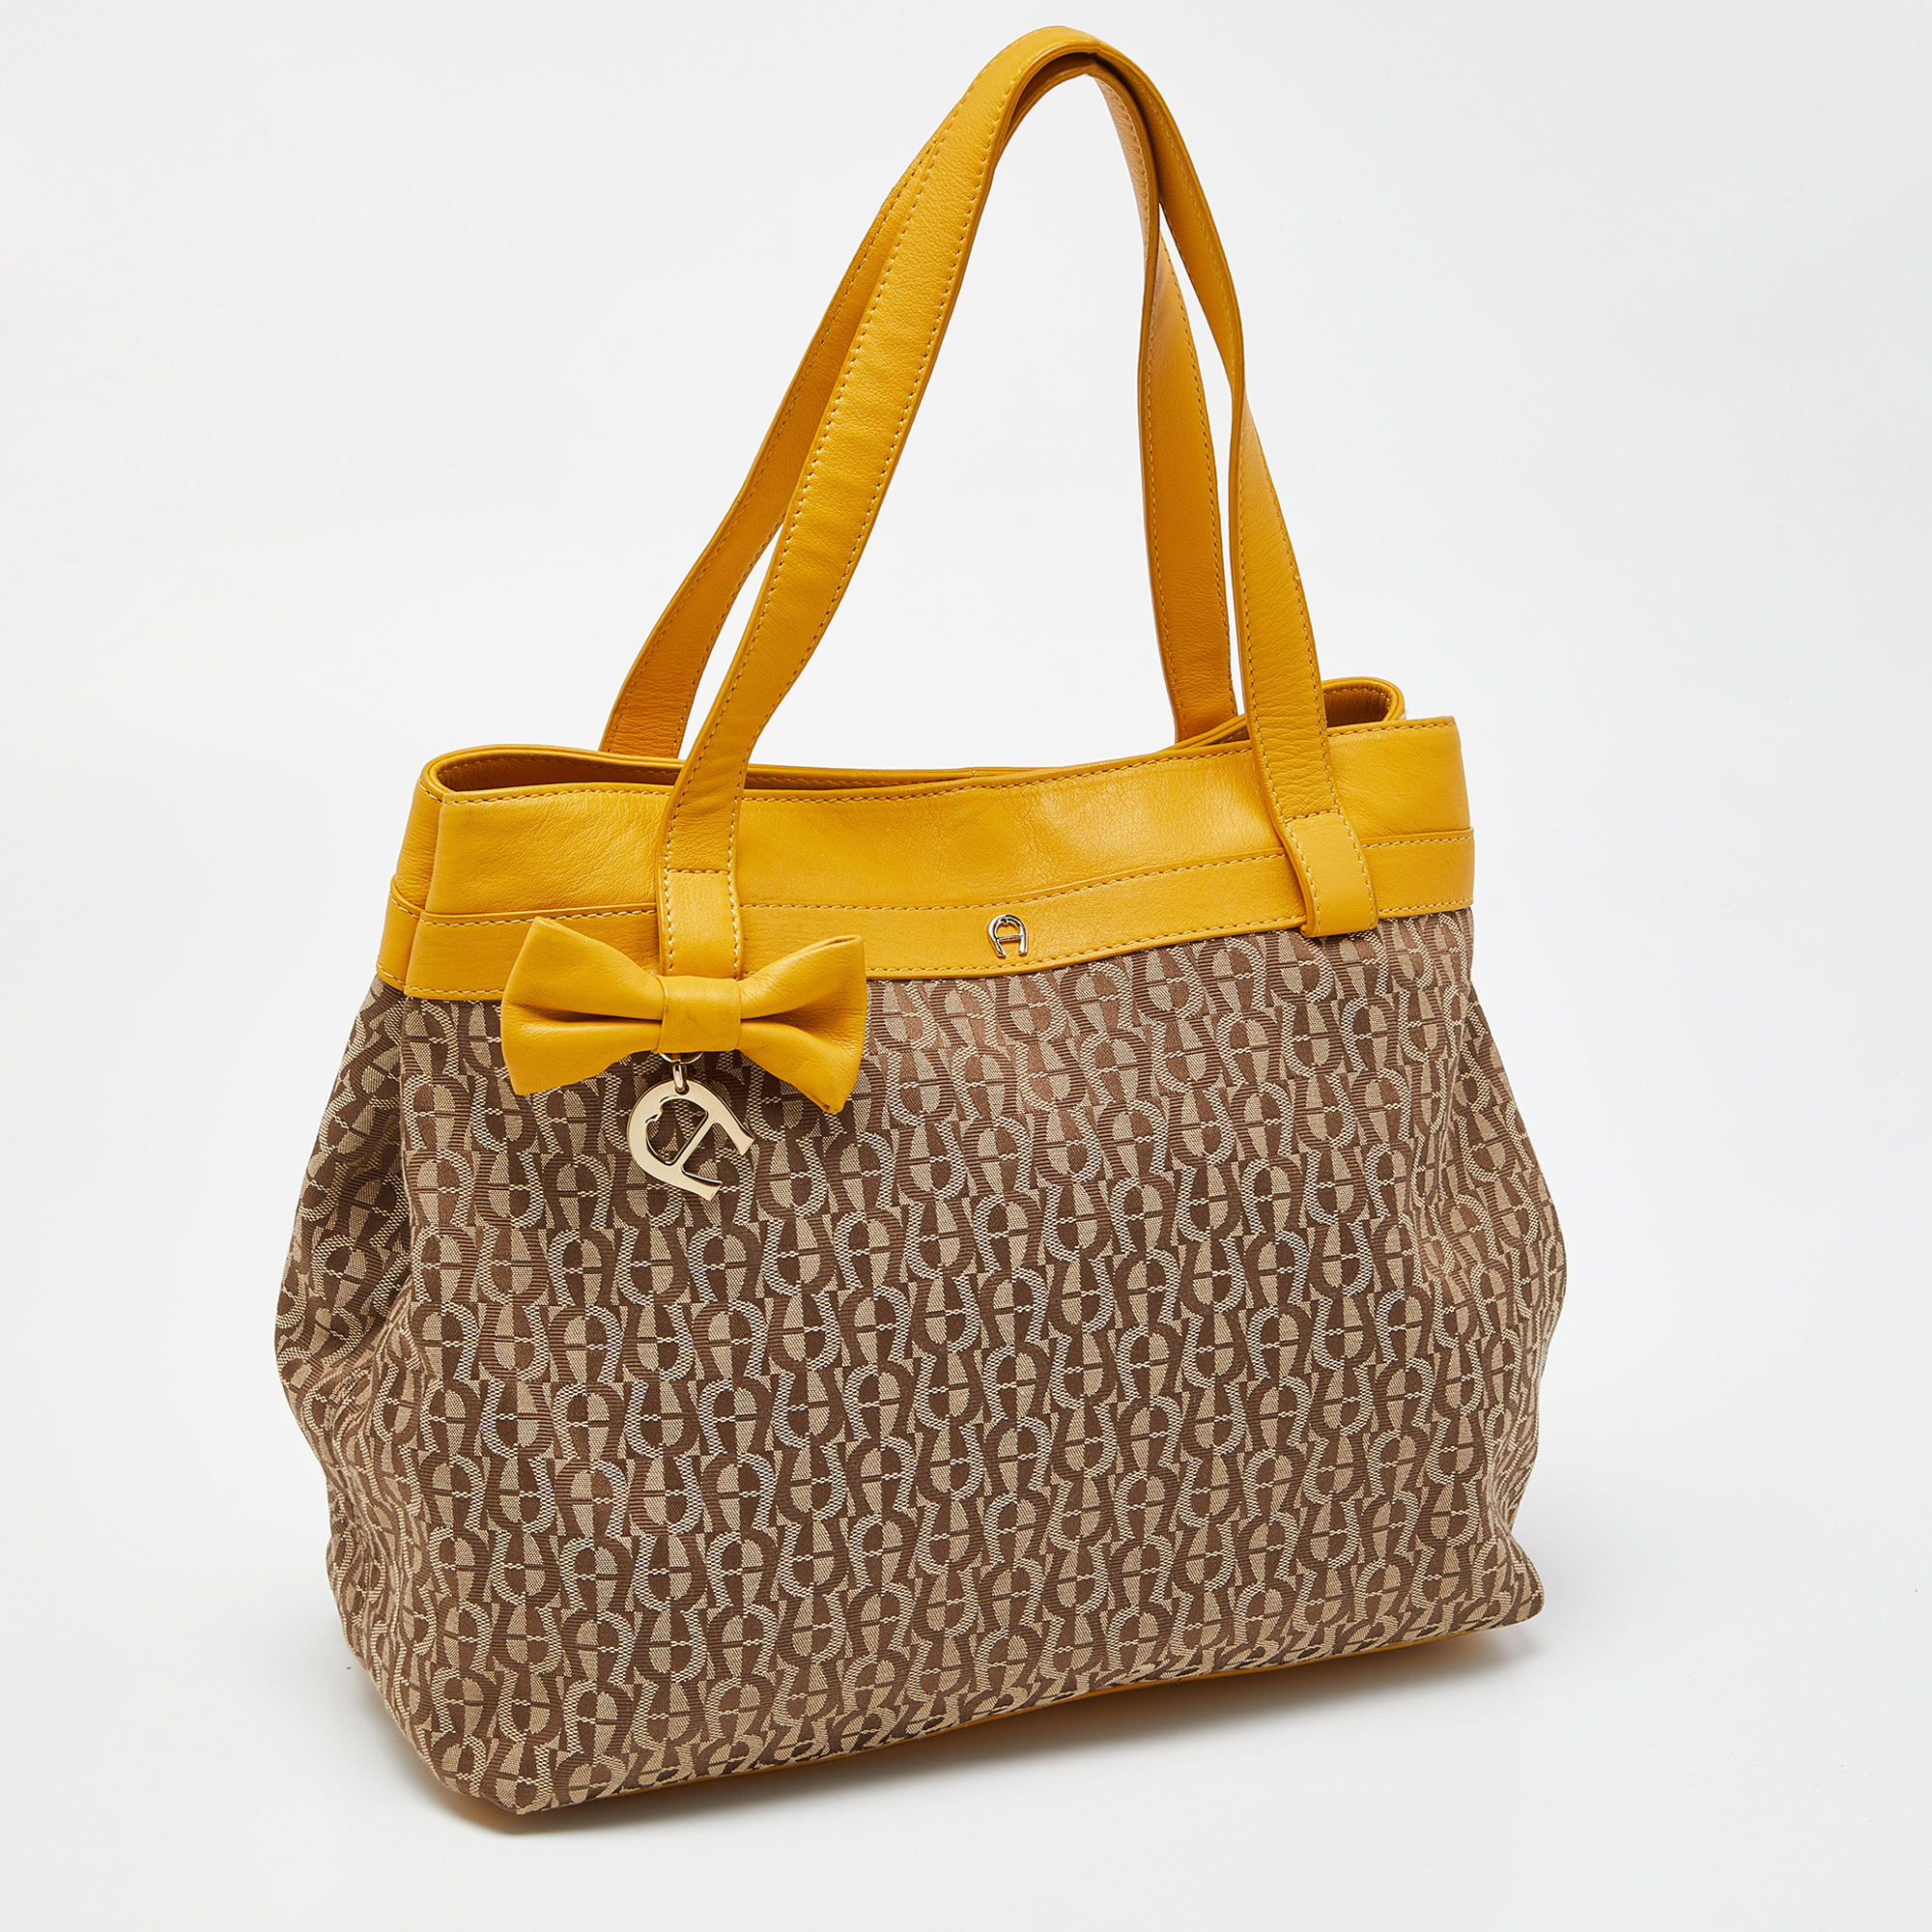 Aigner Beige/Mustard Signature Canvas And Leather Tote